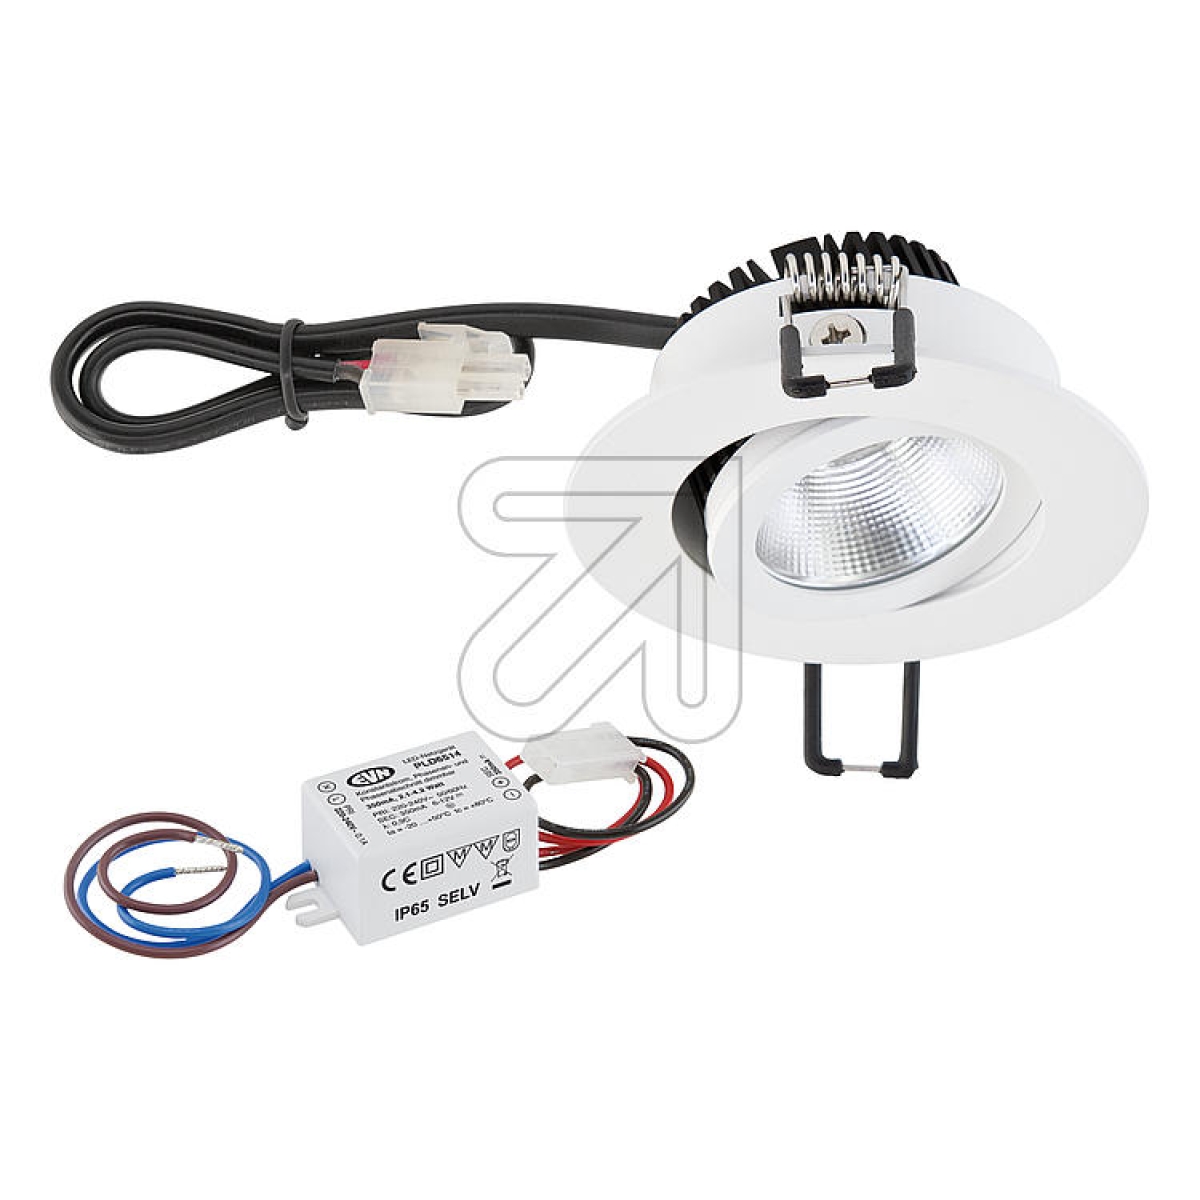 EVNLED recessed spotlight white 3000K 3W PC20N30102Article-No: 684170